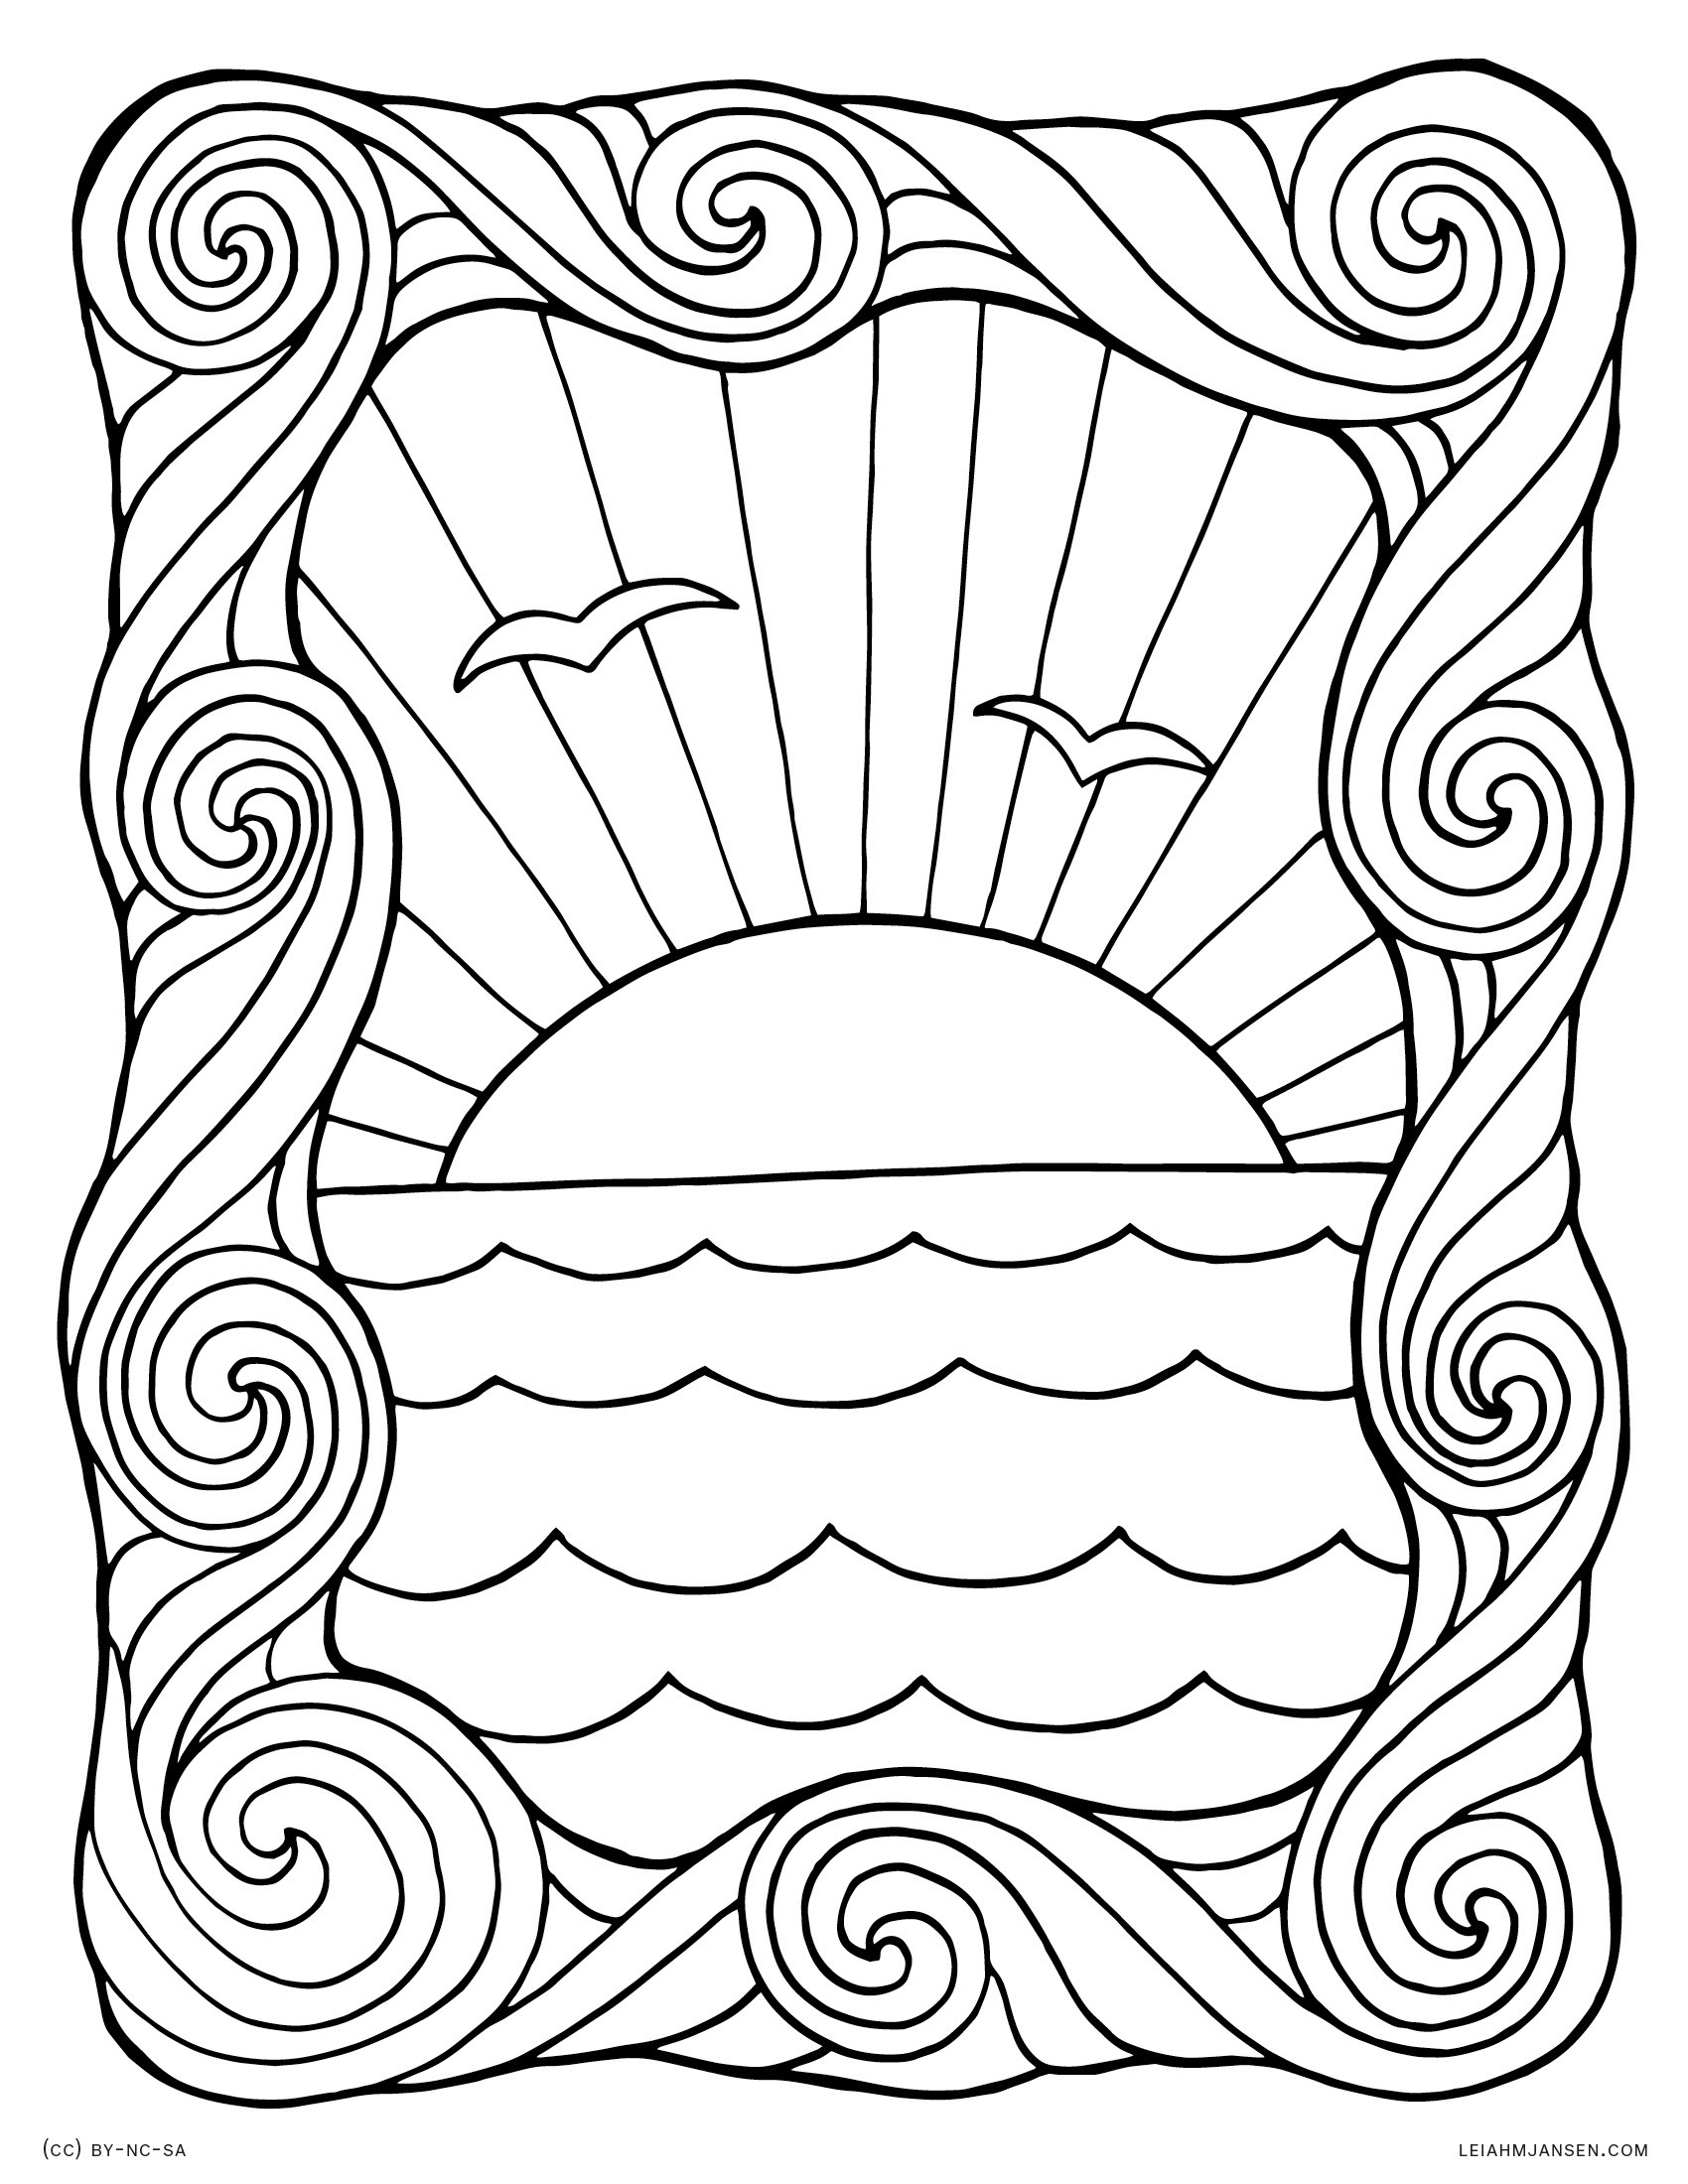 Ocean Waves Coloring Pages For Adults
 Coloring Pages